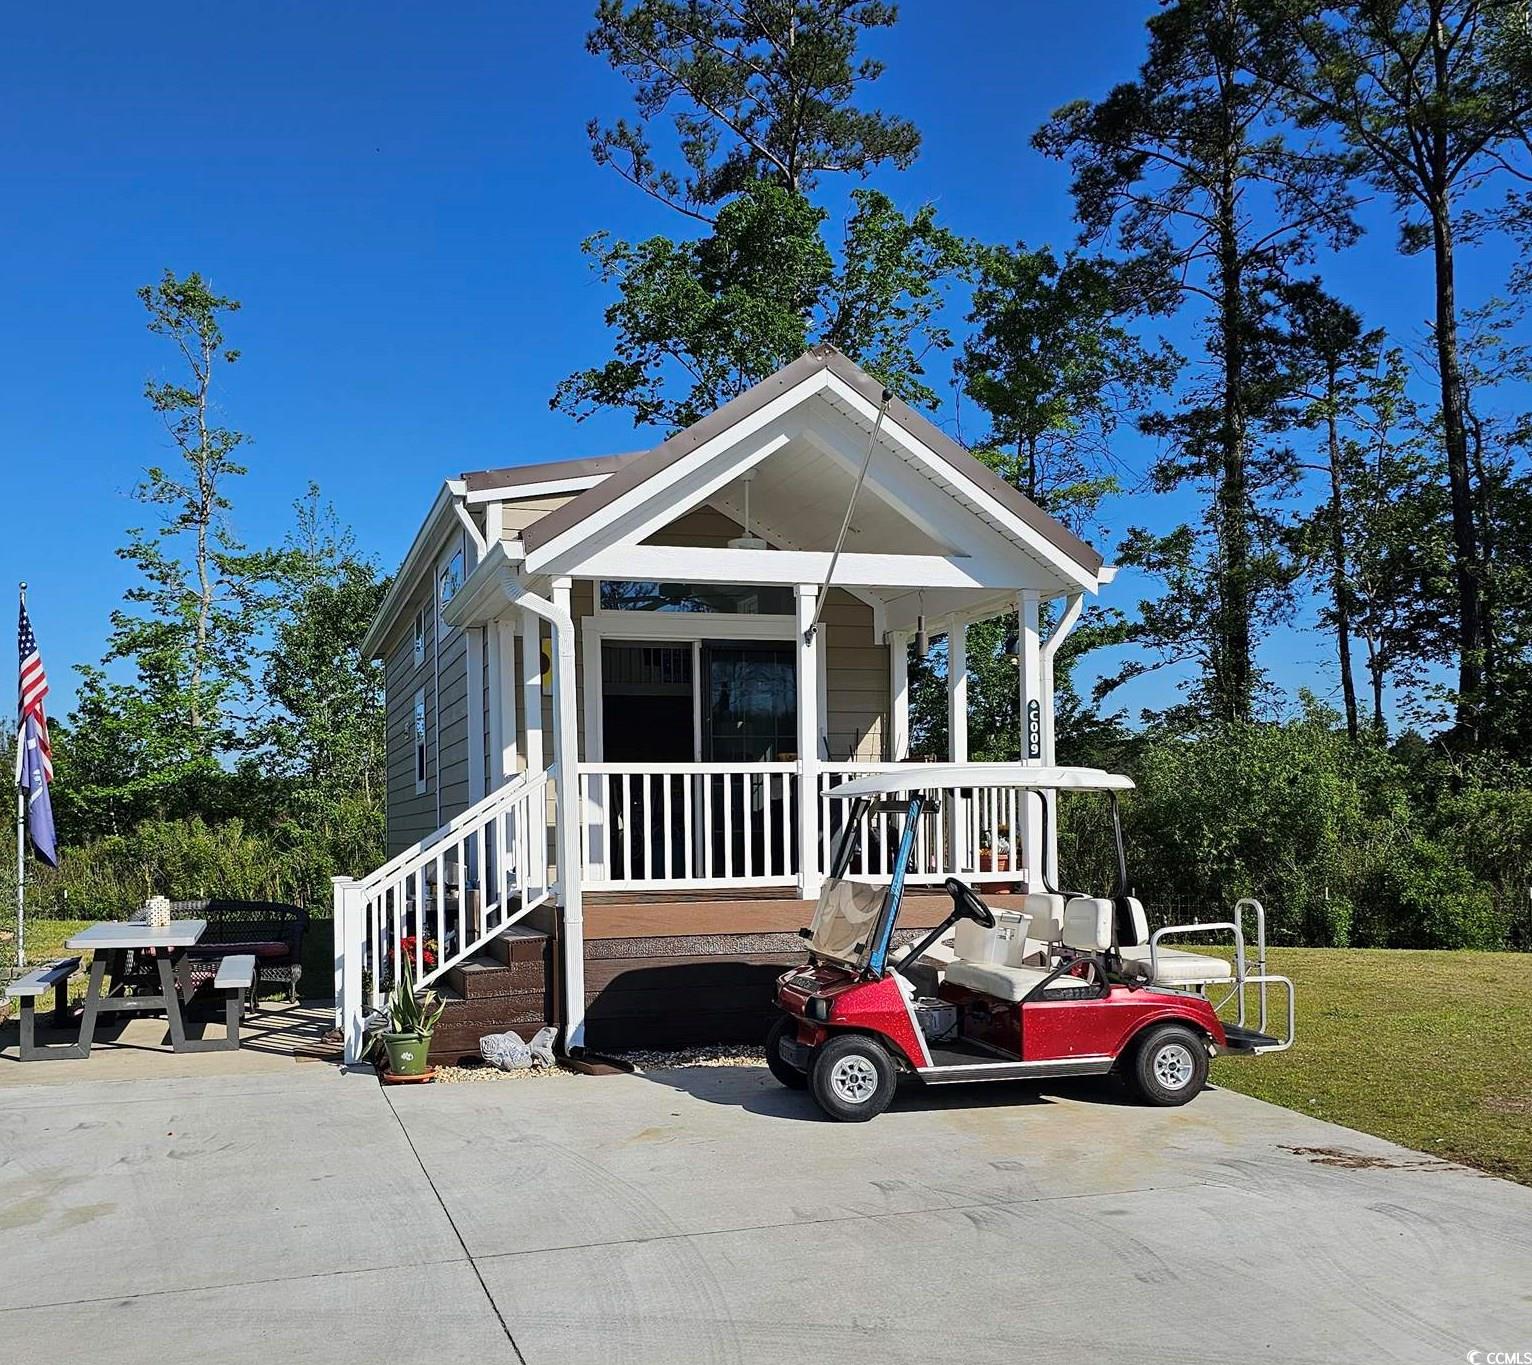 rare opportunity to own a home in sun outdoors myrtle beach!  (formerly carolina pines rv park)   live in a resort with amazing amenities which include a water park, lazy river, adult only pool, yoga studio, bowling alley, multiple swimming pools- including one enclosed pool, mini golf, fitness center, pickleball courts, arcade, playground, general store, dining and drinks bar, dog park, activities all year round, live bands every saturday during the summer and so much more! this 2019 1 bed 1 bath with 2 lofts can stay in the park or be moved to your own lot outside the park. house was freshly painted in 2022! this unique home has a new 2023 refrigerator, washer & dryer.  stove is run off propane. hvac is 2019 with a 7 year warranty.  sellers added an attached shed for more storage!   spacious living area to entertain or  outside on your front porch overlooking the lake view!   feel like you are on vacation every day!  surround yourself around the firepit and roast marshmallows!  grill outdoors and drink your favorite beverages!   take a ride on your golf cart, that comes with the home, and enjoy this amazing campground!   do not miss out on this rare opportunity!  partially furnished!